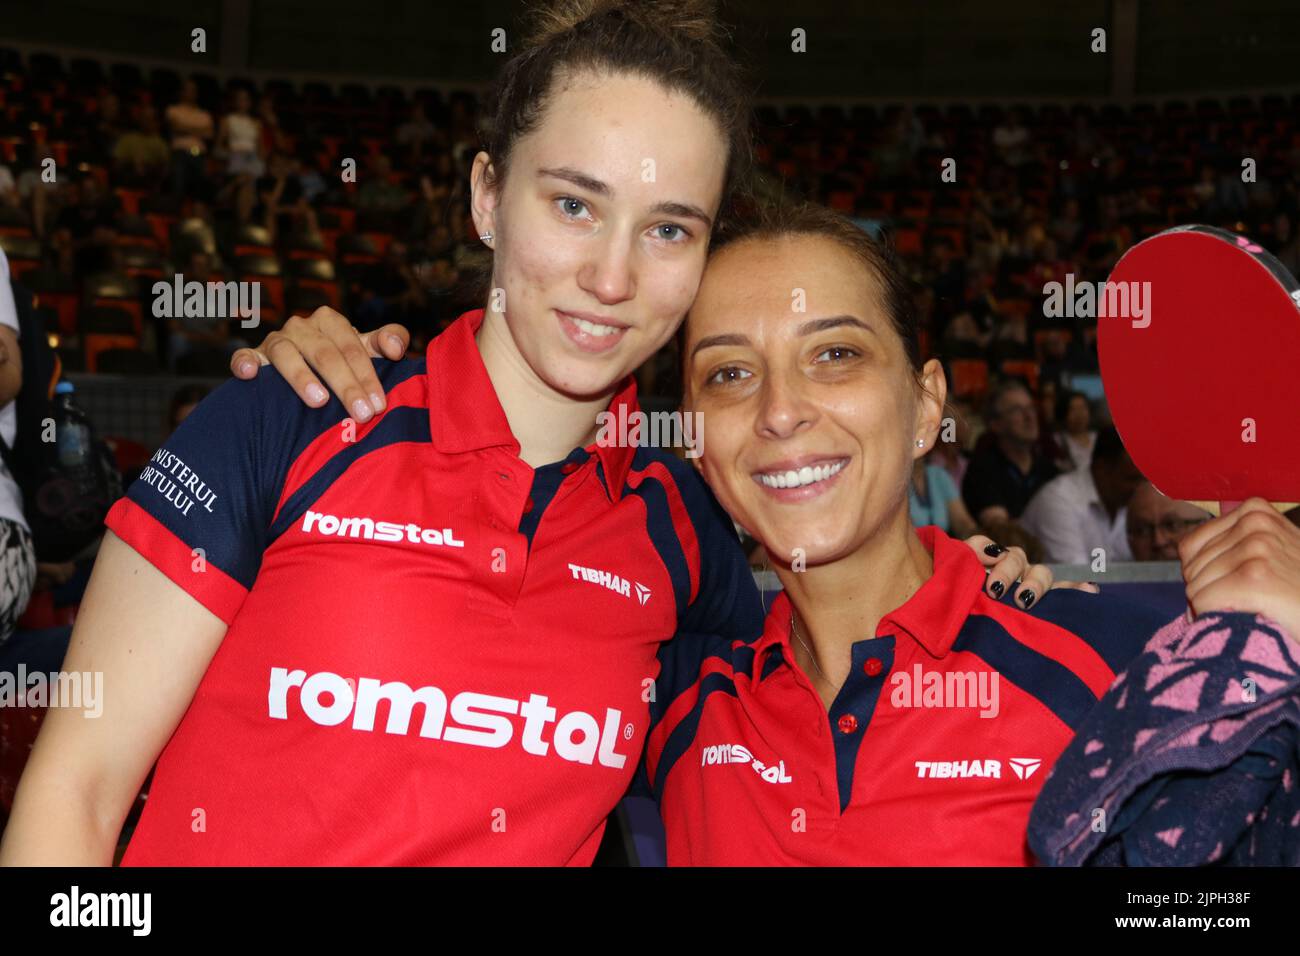 Munich, Germany . 18th Aug, 2022. MUNICH, Germany., . TABLE TENNIS - Day 8 - European Championships Munich 2022 - celebration and joy by the match winners (R) Elizabeta SAMARA/Andreea DRAGOMAN (L) of Romania - WOMEN'S DOUBLES SEMIFINAL match on day 8 of the European Championships Munich 2022 at Rudi-Sedlmayer-Halle on August 15, 2022 in Munich, Germany. photo by Arthur THILL/ATP images Credit: SPP Sport Press Photo. /Alamy Live News Stock Photo